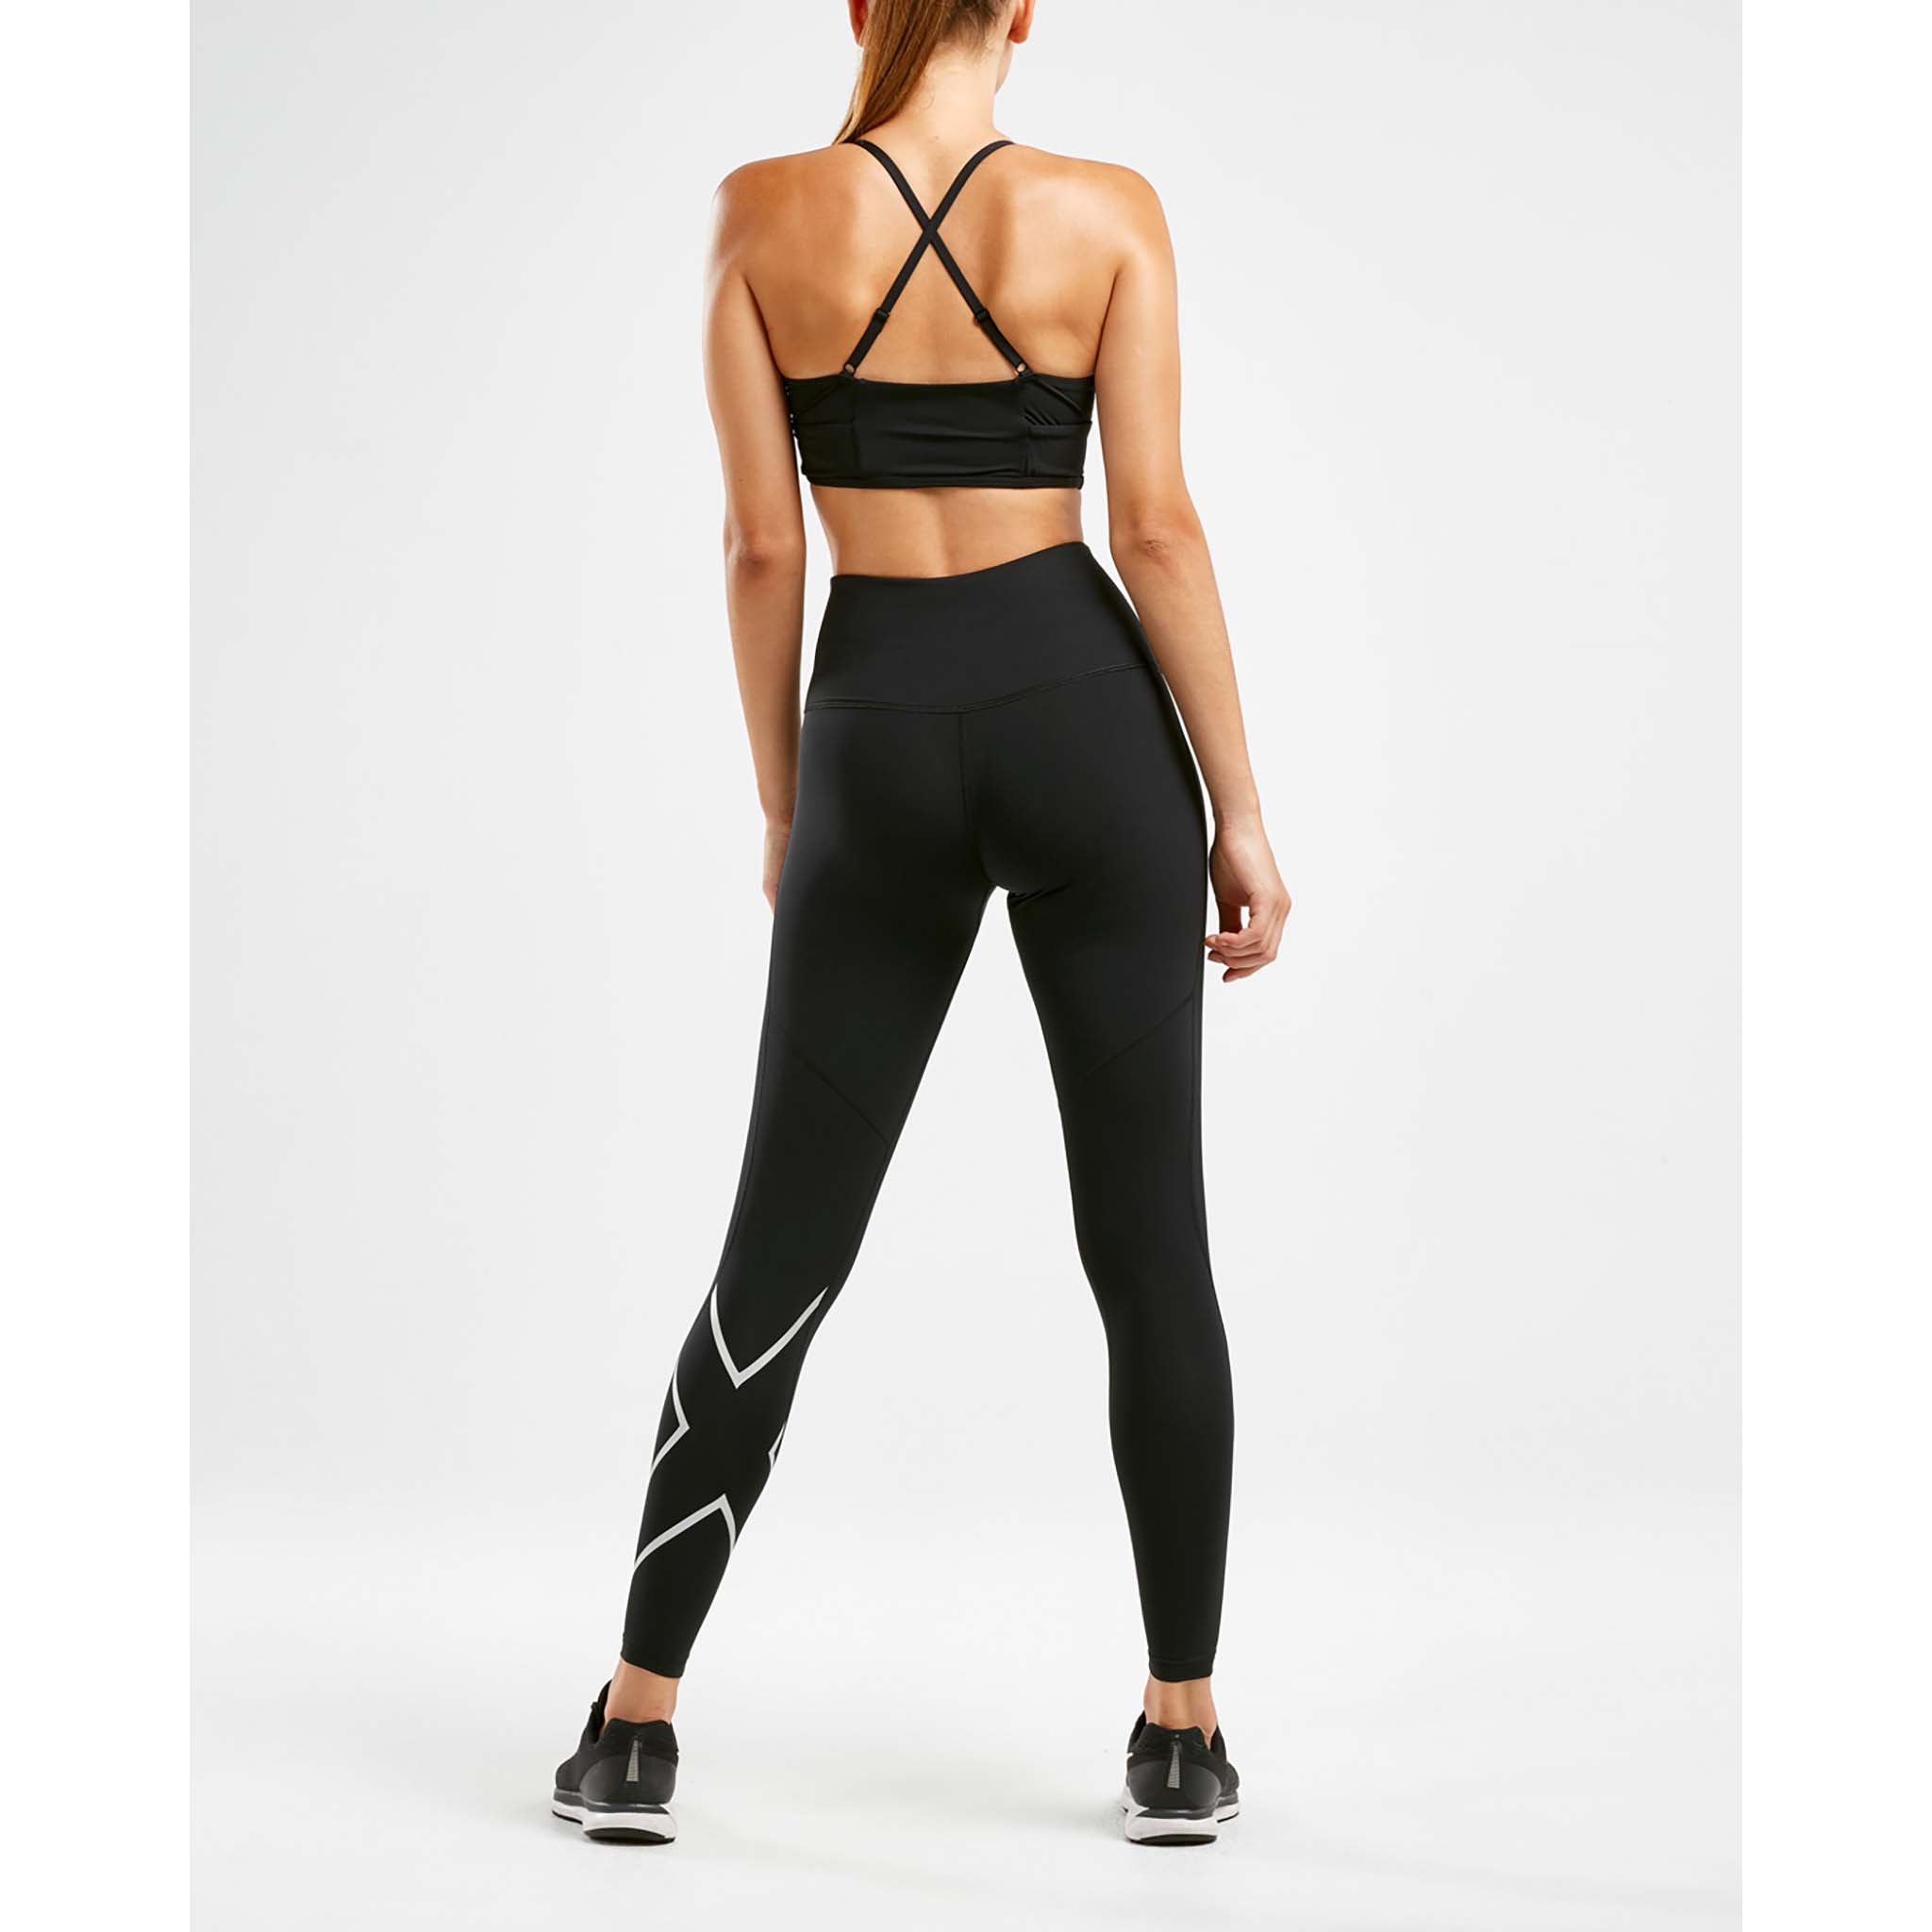 2XU Motion Hi-Rise Compression Tights for women